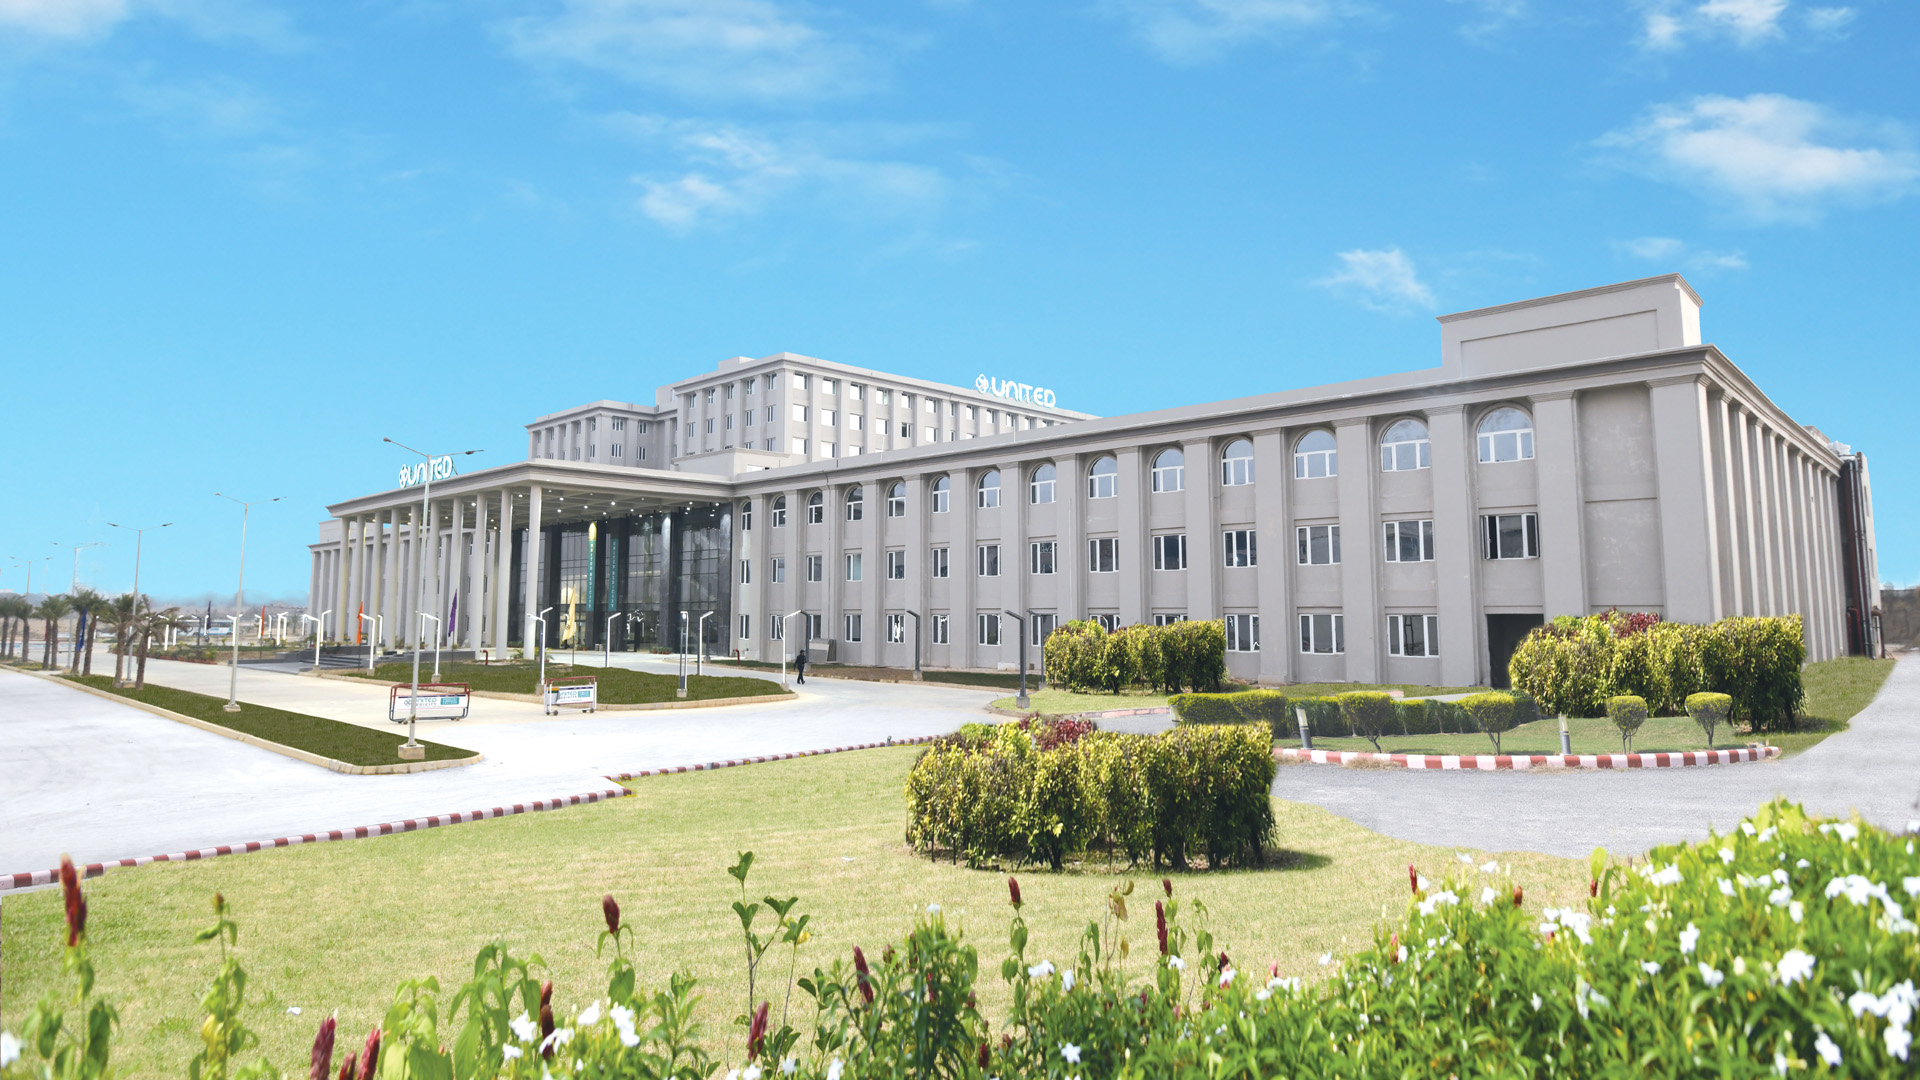 United University side view